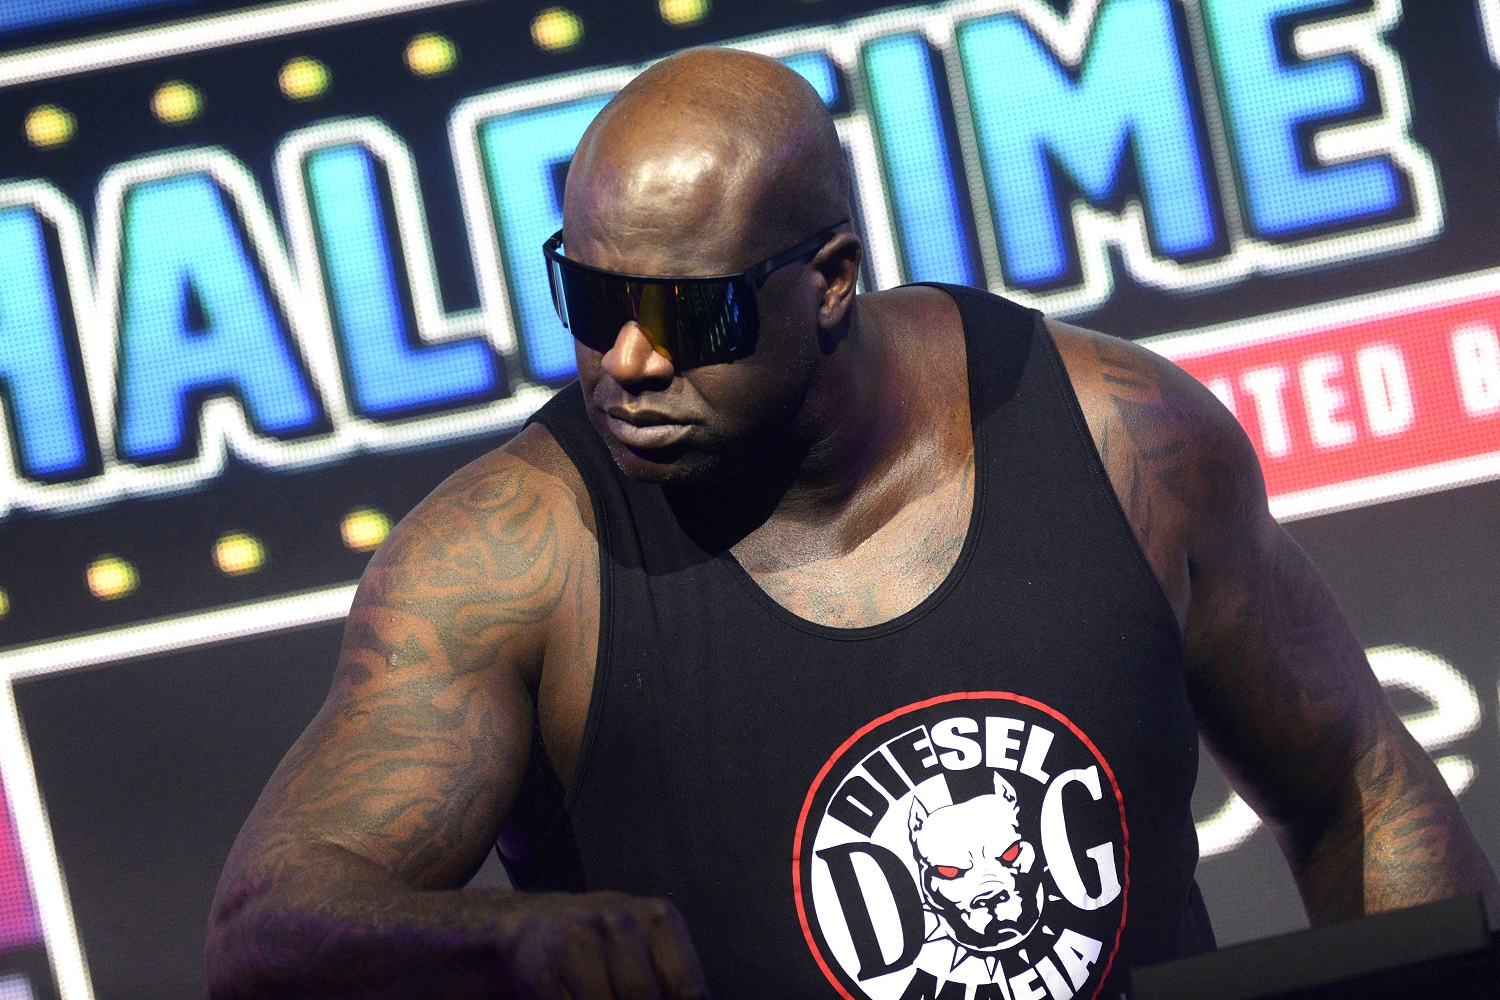 Shaquille O’Neal performs as DJ Diesel at The Shaq Bowl for Super Bowl 55 in Tampa, Florida. | Gerardo Mora/Getty Images